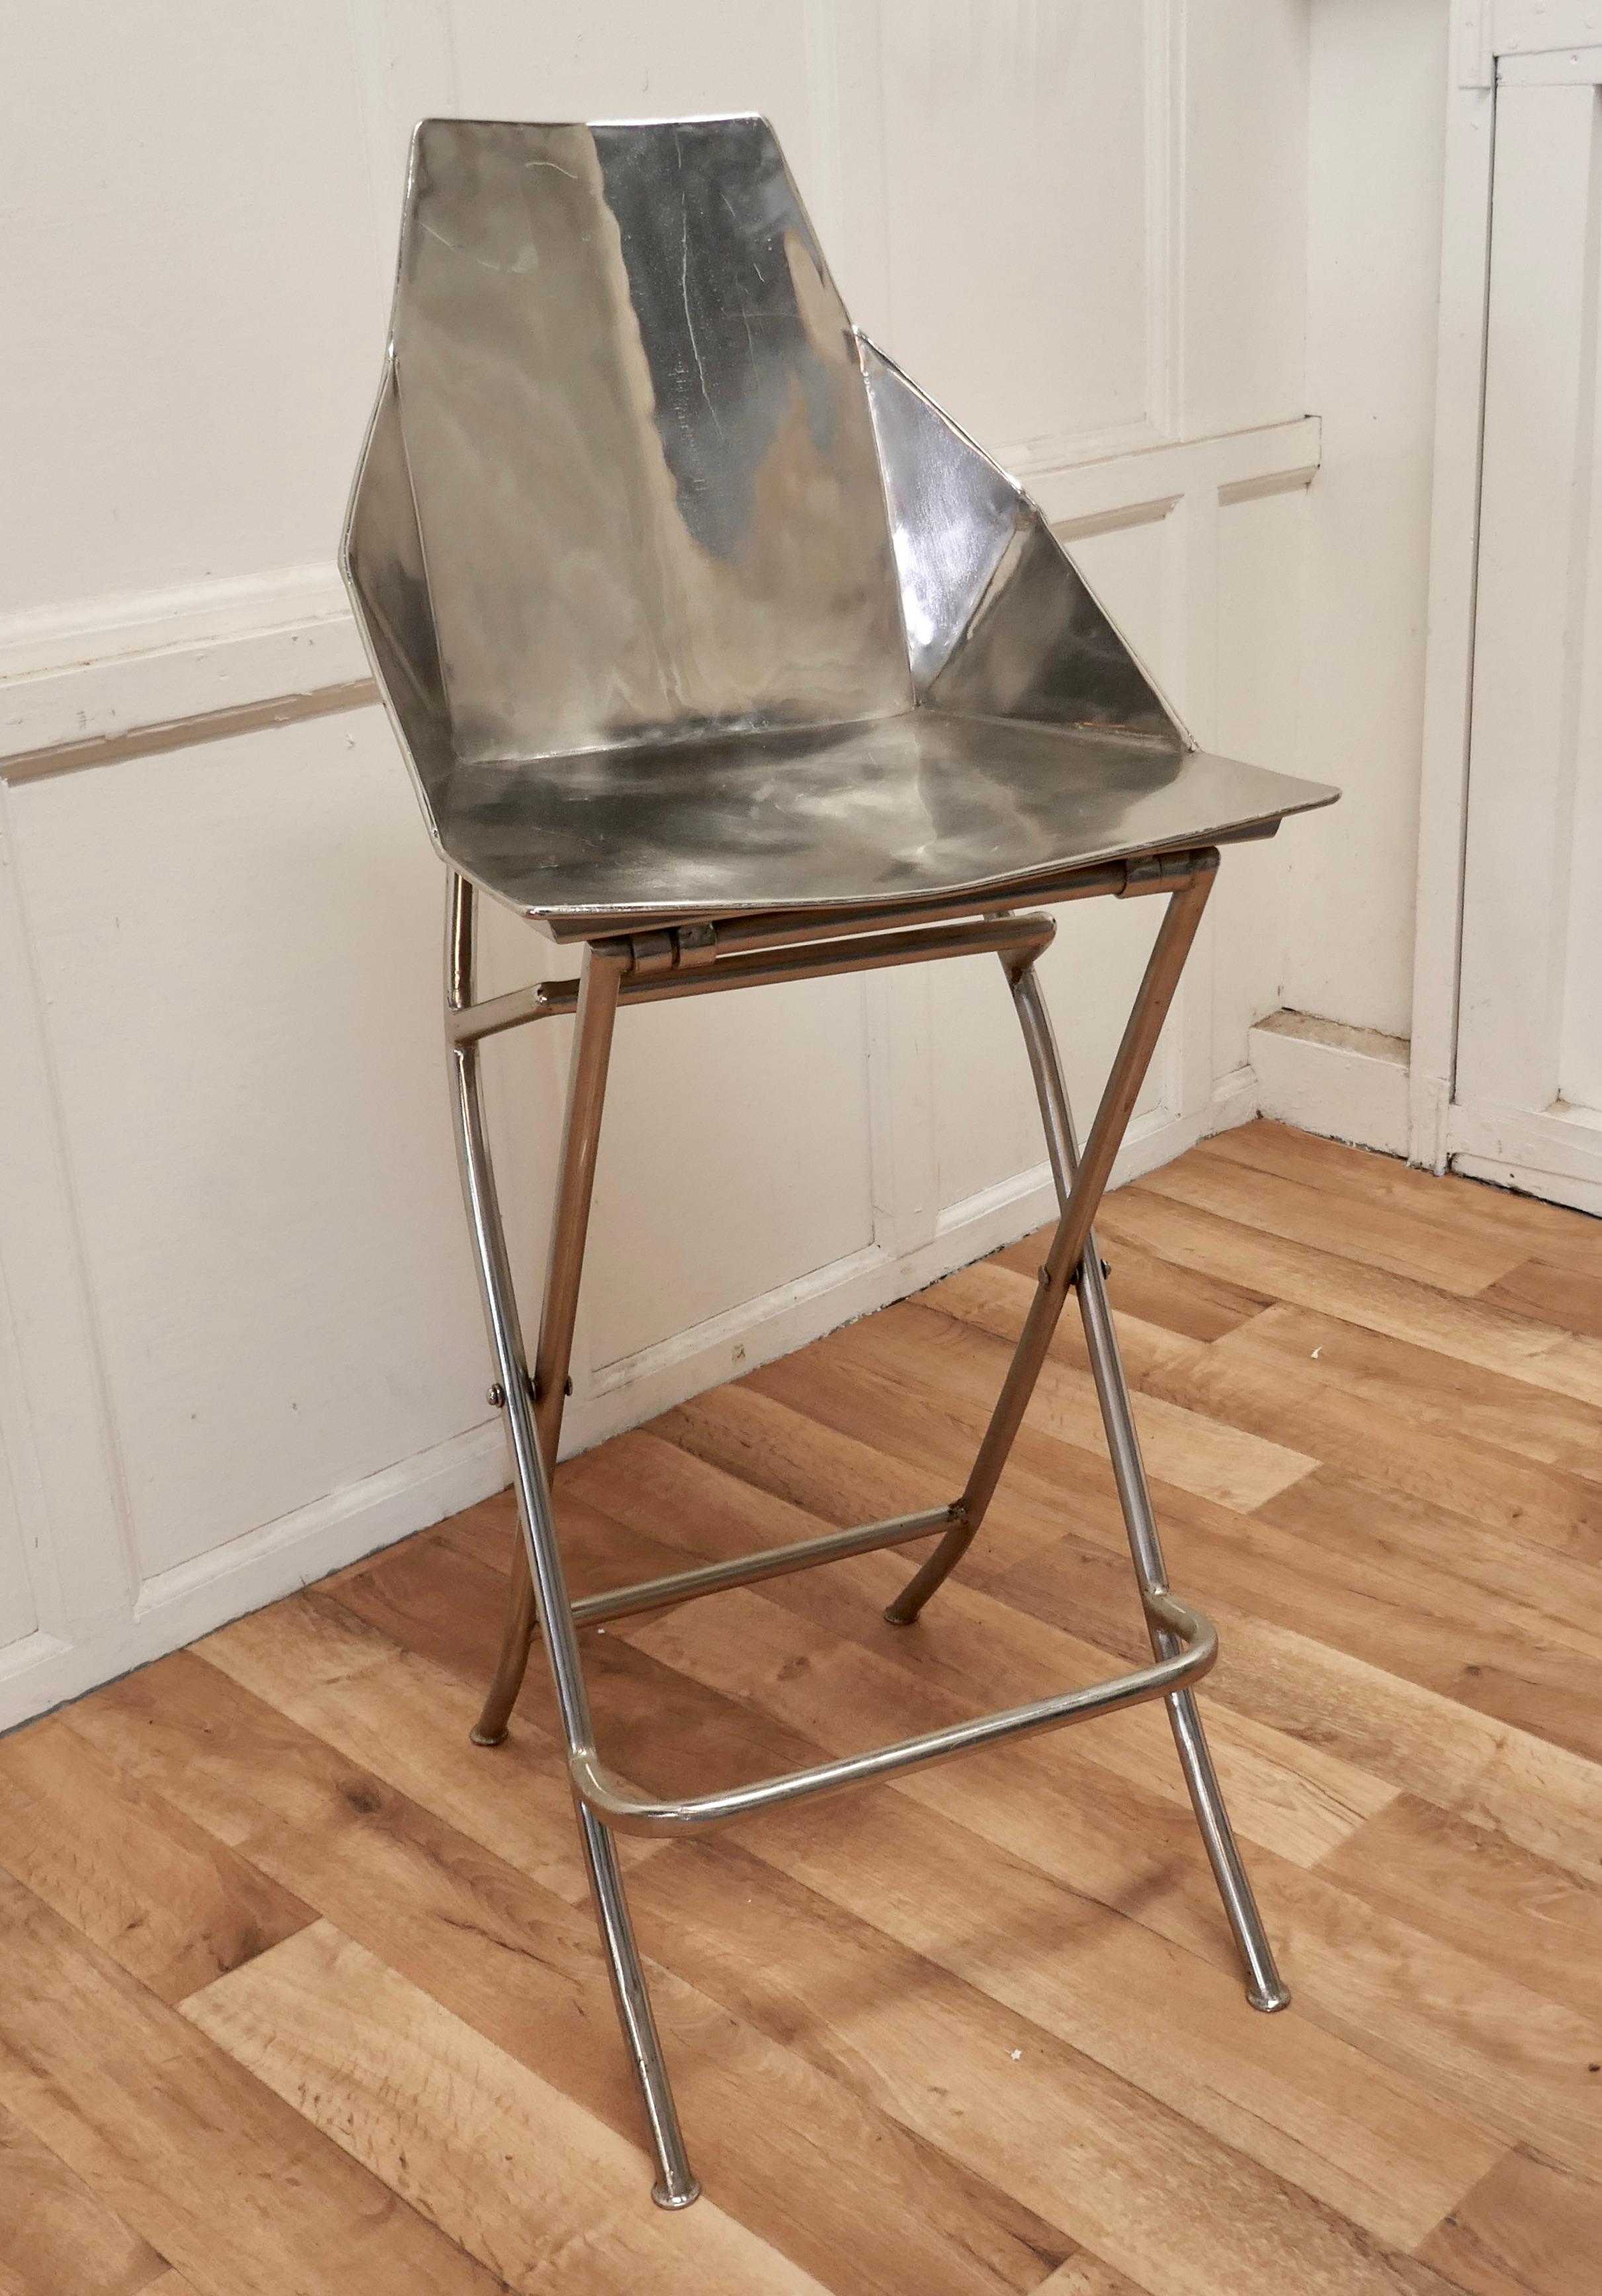 Unusual steel adjustable designer chair

A very unusual piece, this chair is all made in steel, the seat can be set to 2 different heights either to suit a Bar or a Table ( very handy for kitchen use)
The chair has a foot support rail, a flat